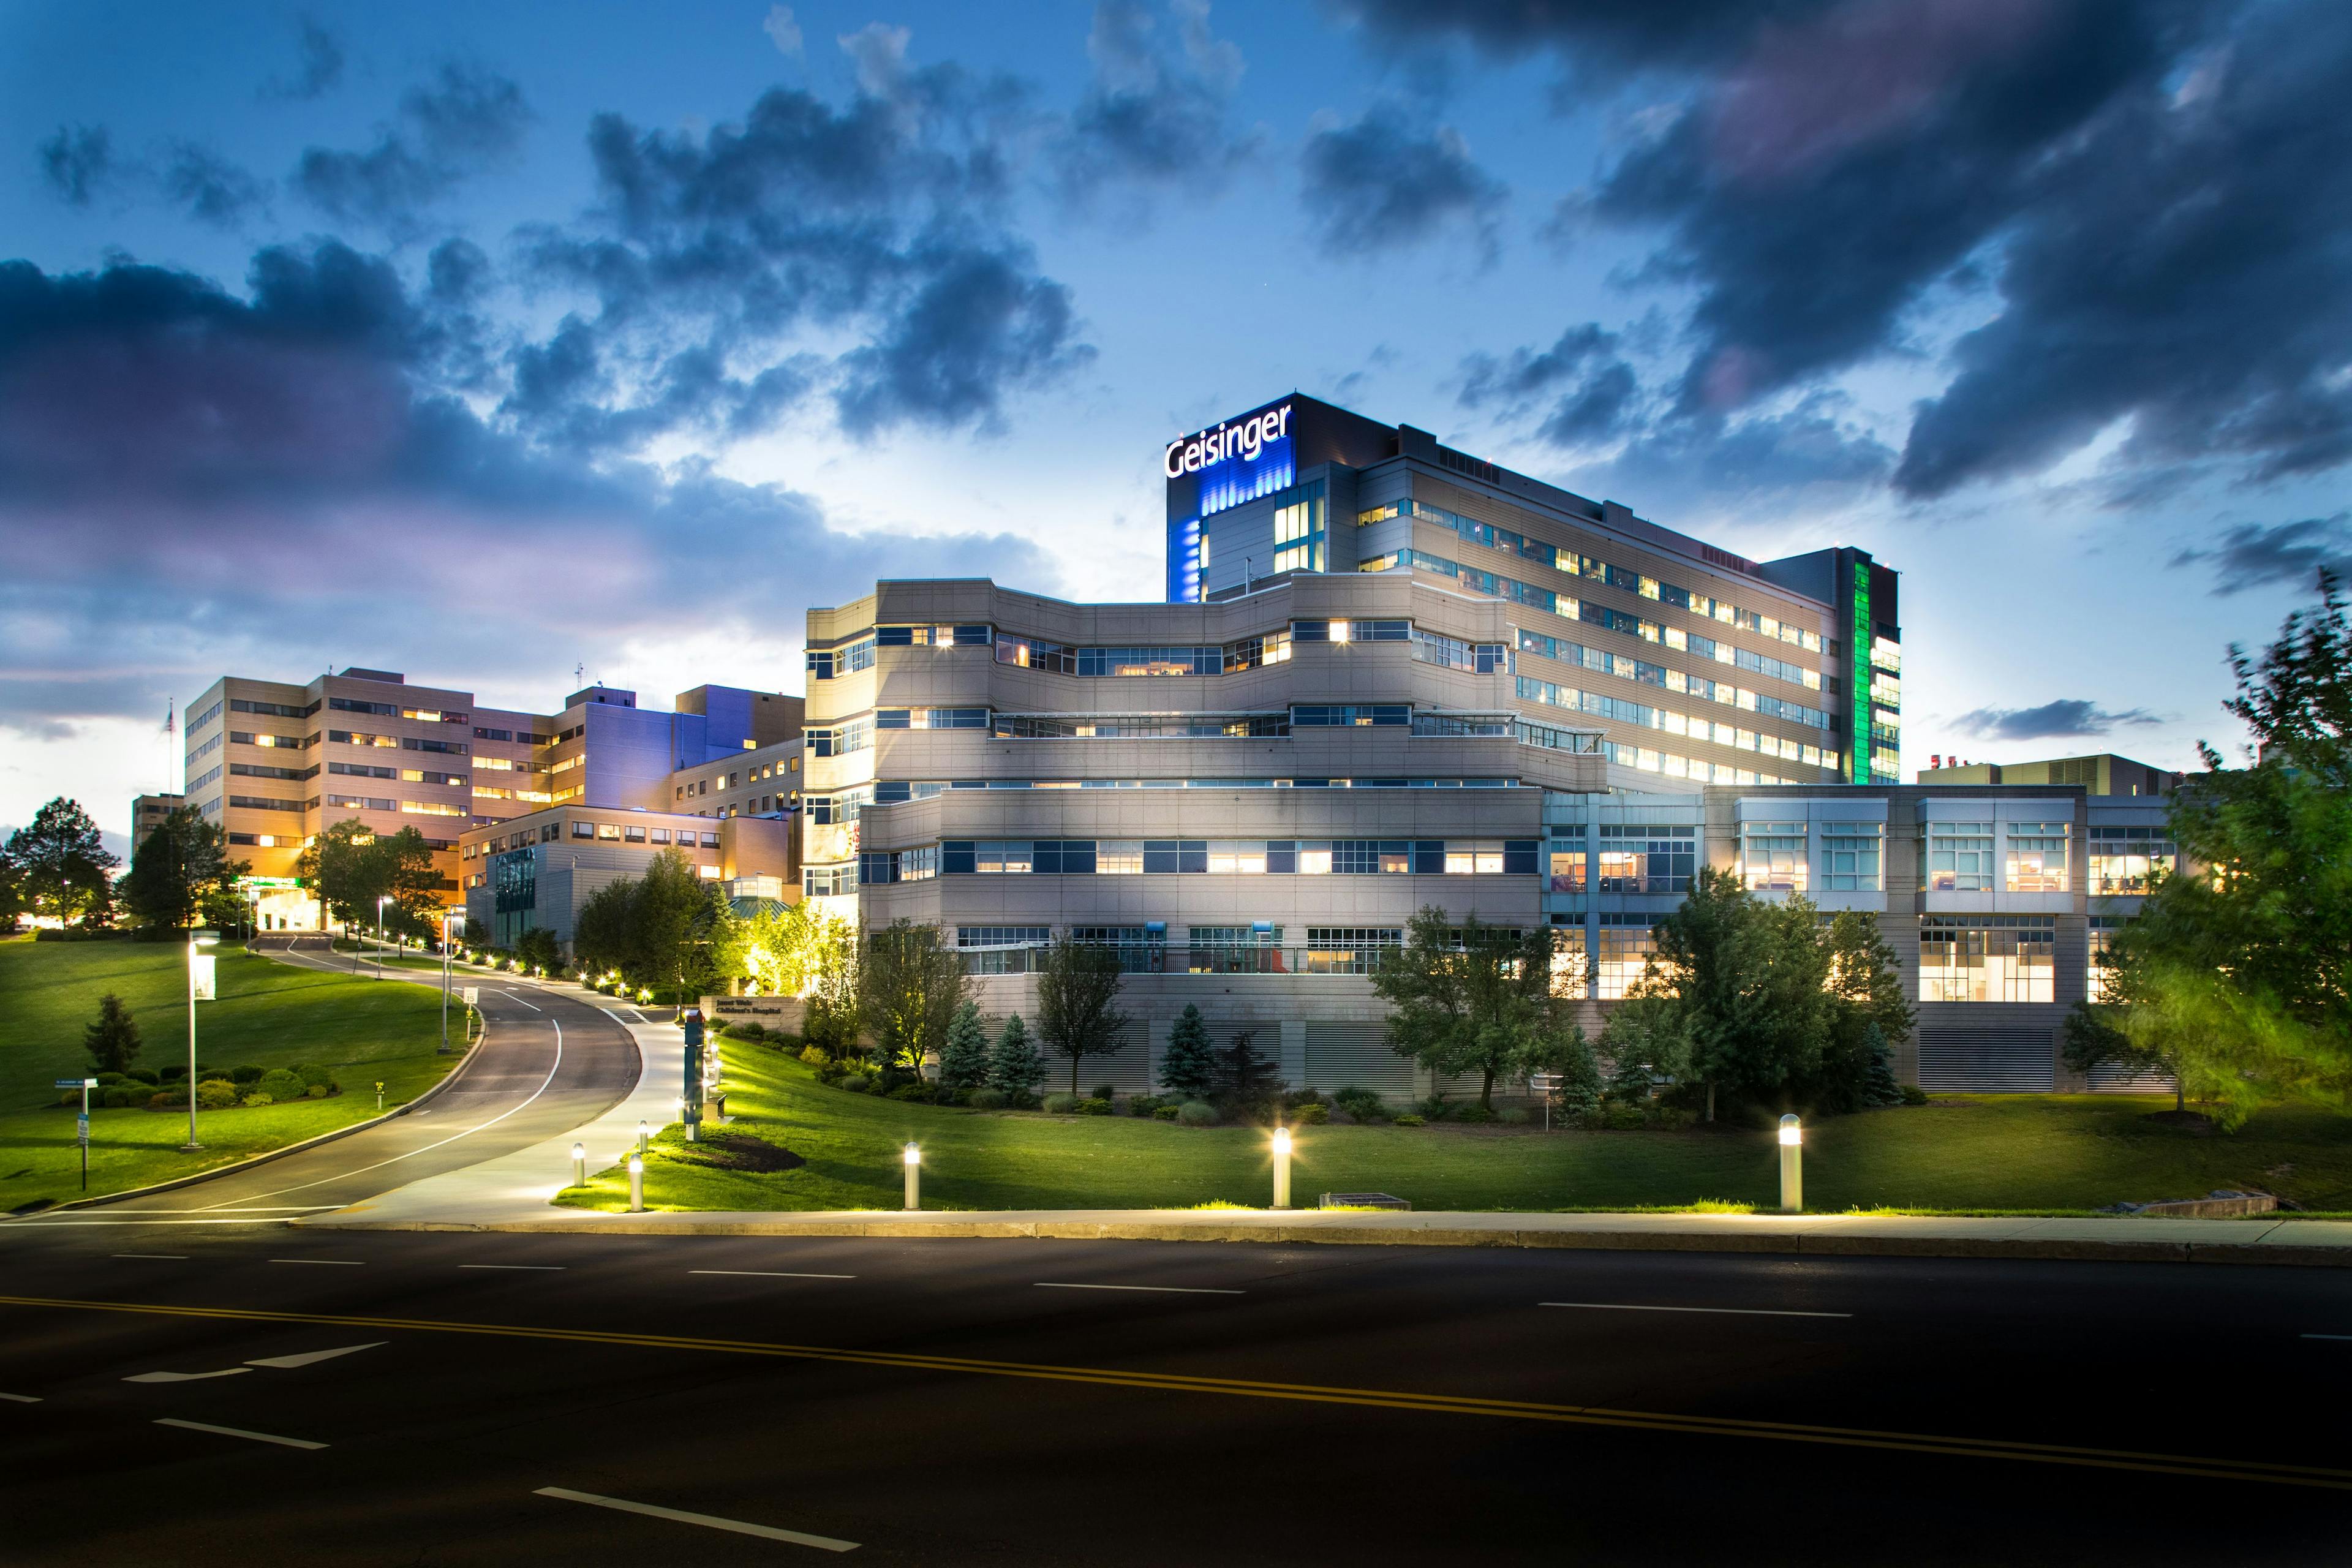 Kaiser Permanente is planning to acquire Geisinger Health, and the deal has proven to be one of the biggest stories of the year. (Photo credit: Mark Dastrup for Geisinger)